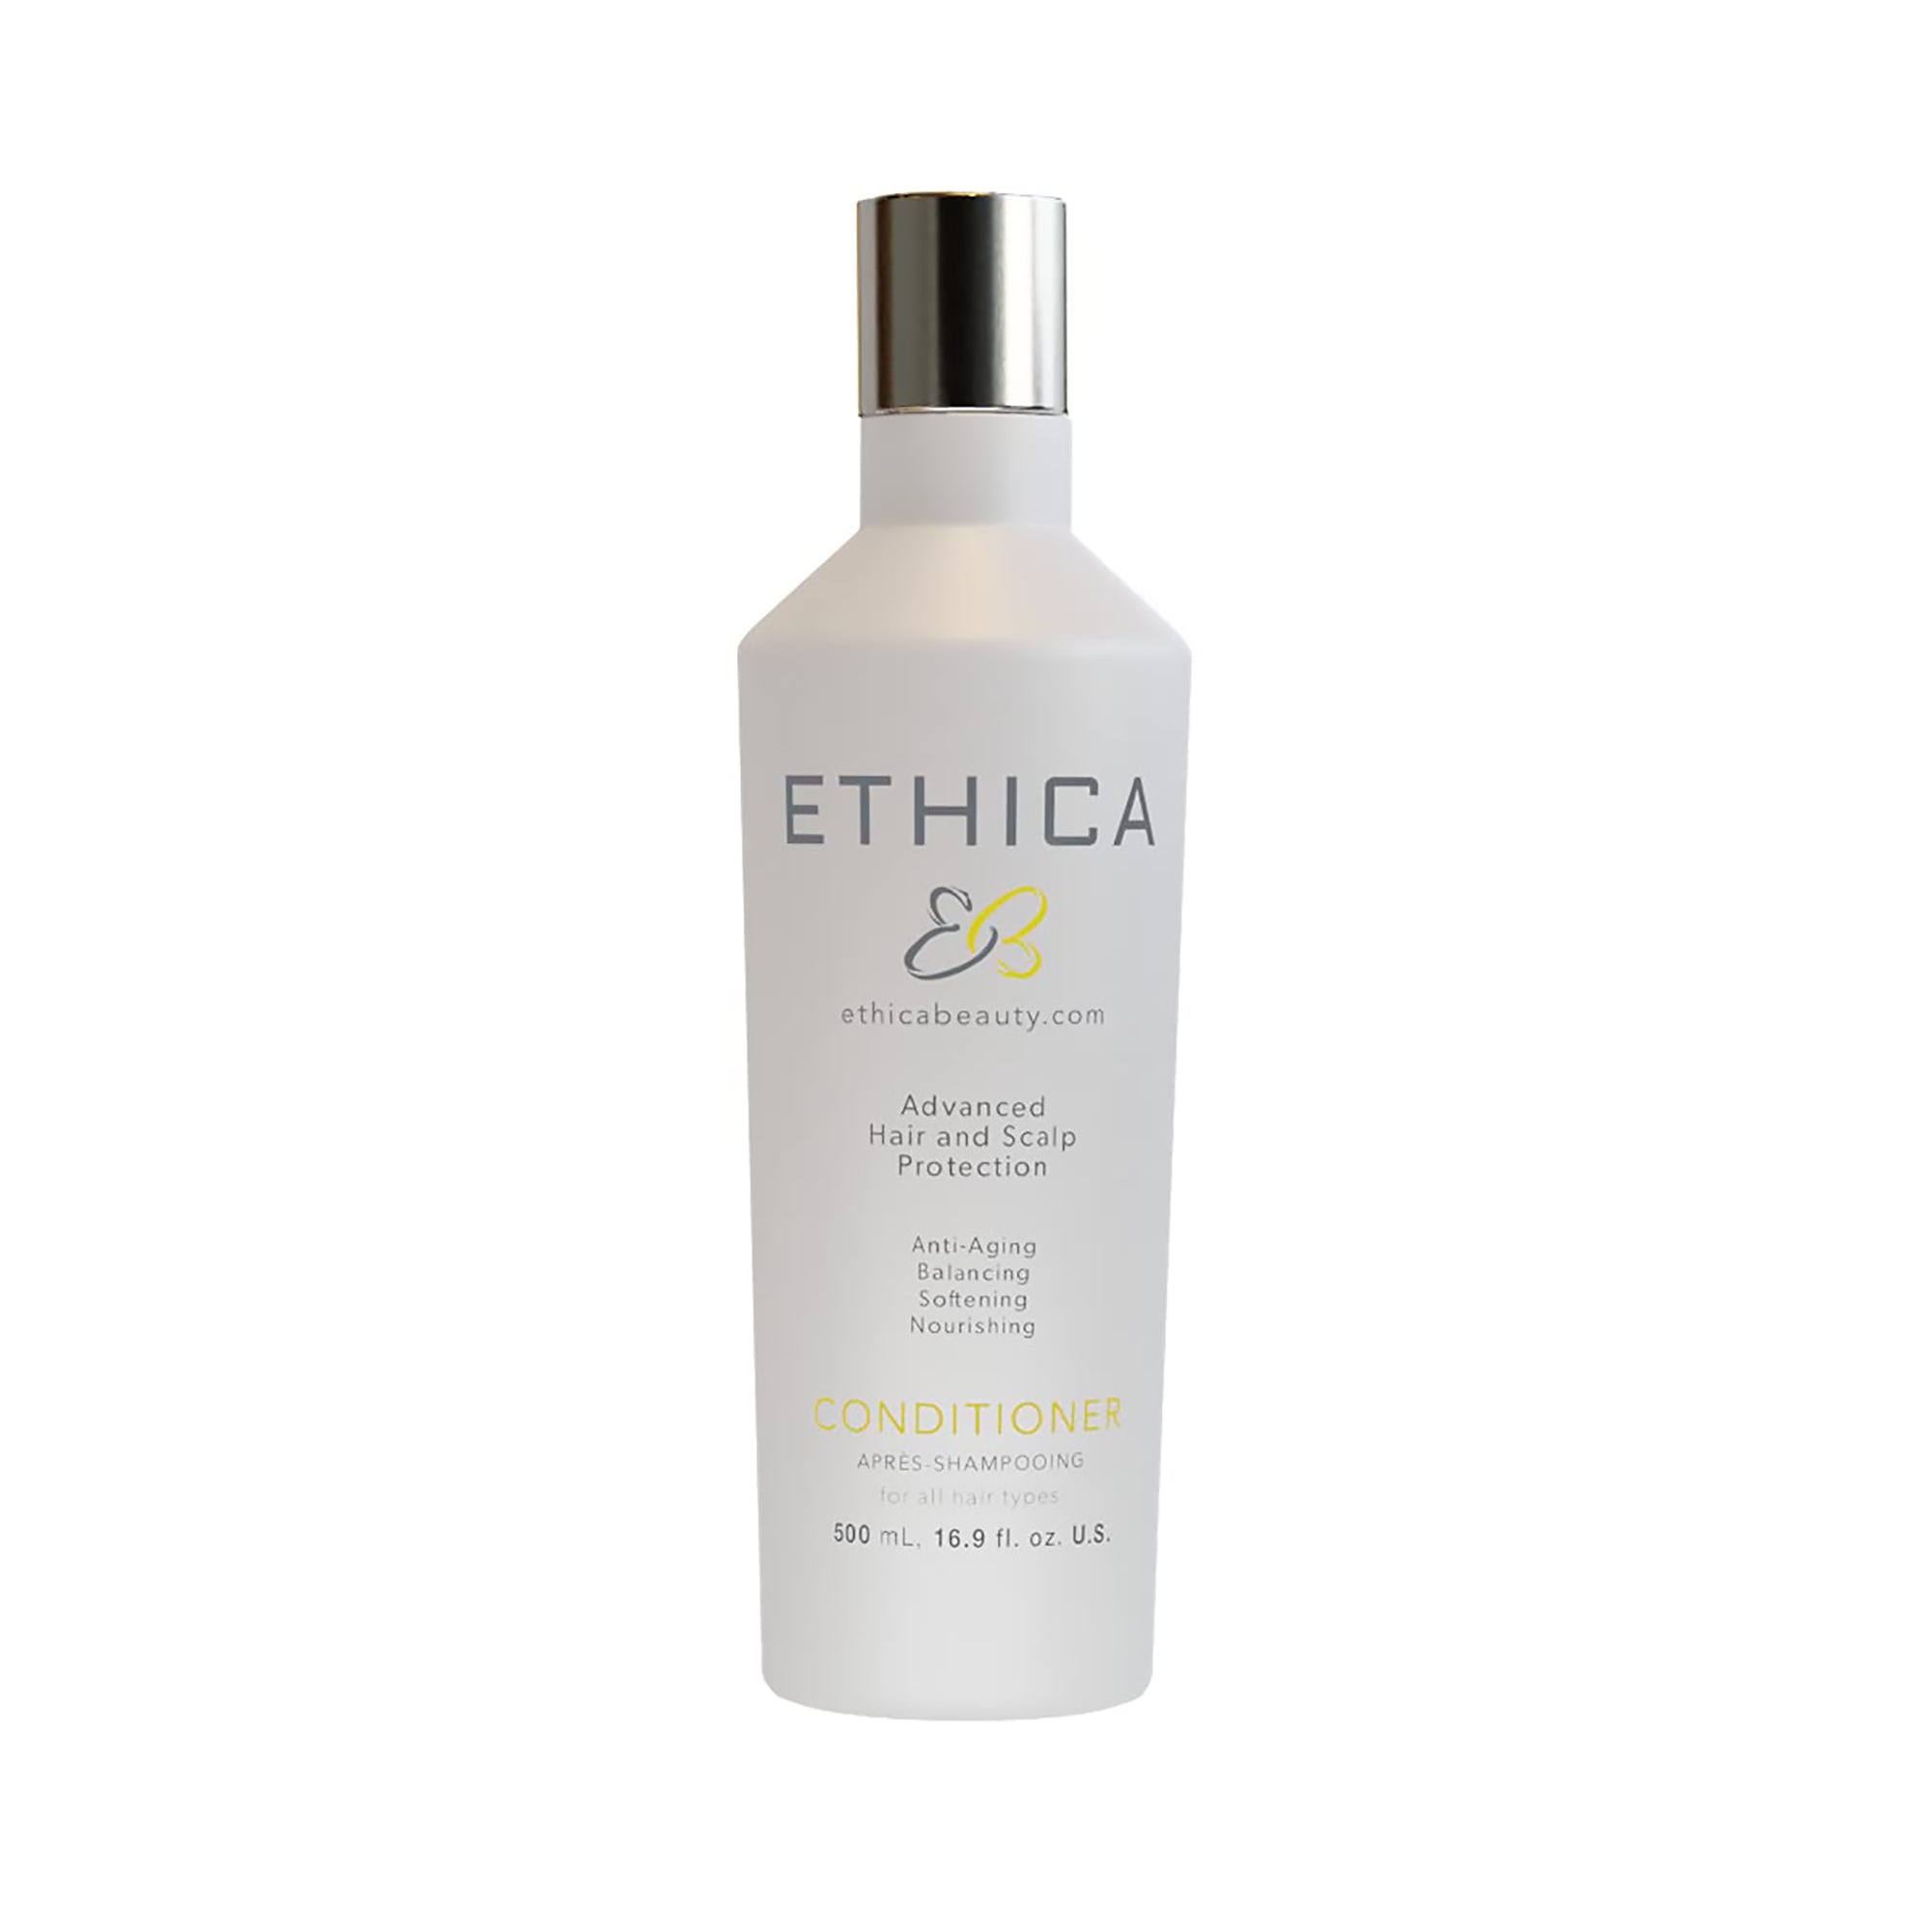 Ethica Beauty Energizing Anti-Aging Protective Daily Conditioner / 16.9OZ